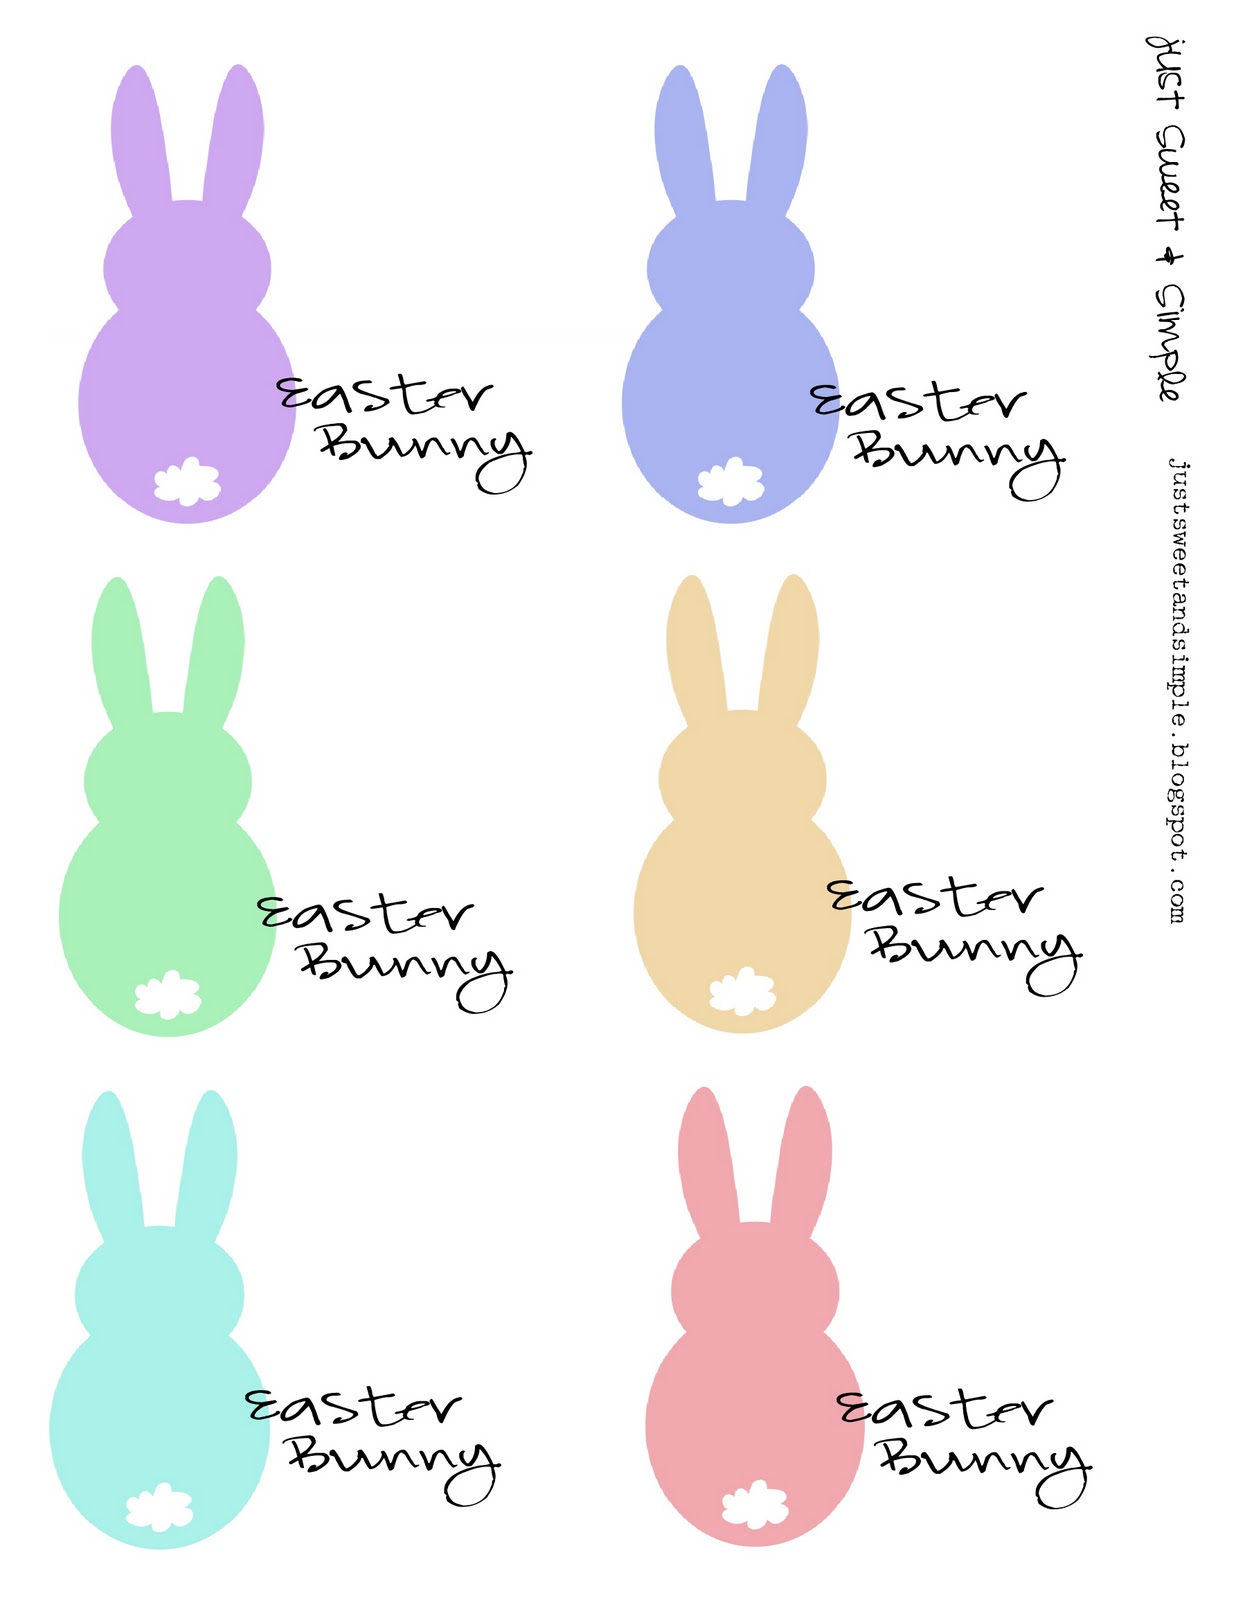 just-sweet-and-simple-easter-bunny-notes